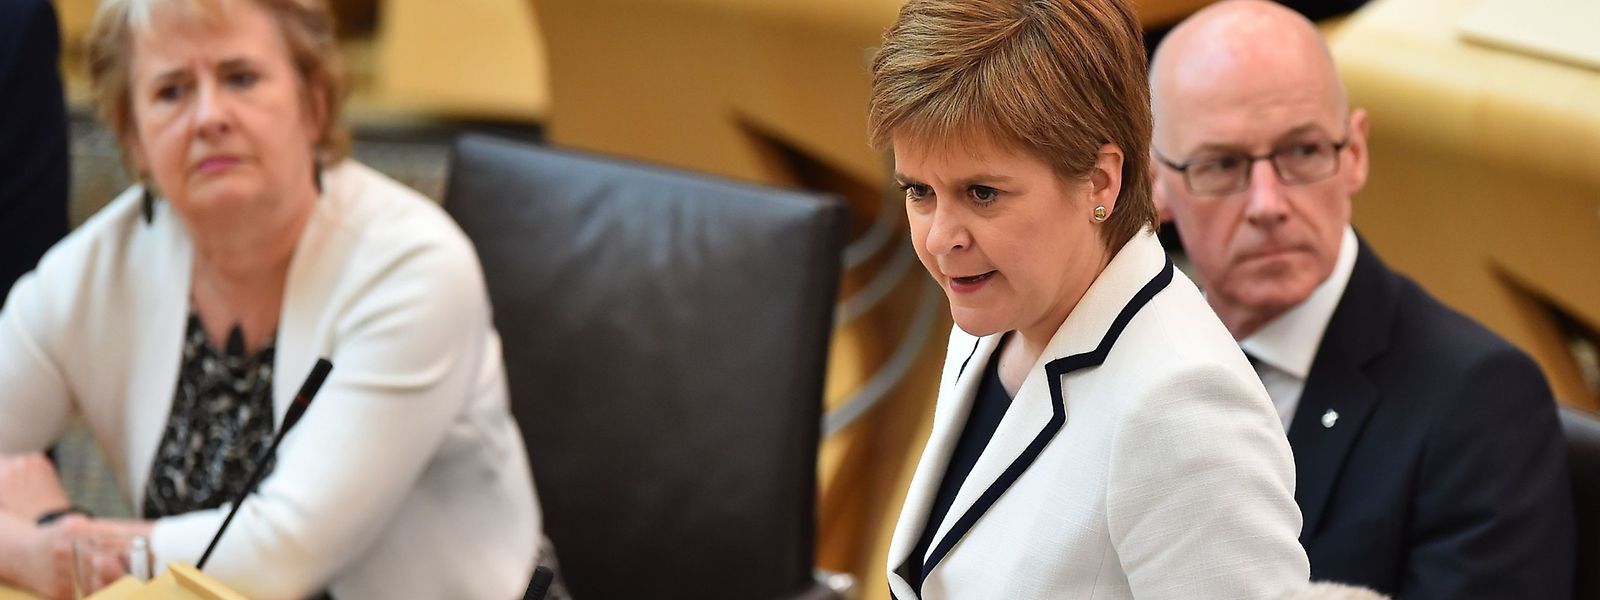 Scotland's First Minister Nicola Sturgeon makes a statement to the Scottish Parliament on Brexit and a second independence referendum, at Holyrood, central Edinburgh on April 24, 2019. (Photo by ANDY BUCHANAN / AFP)